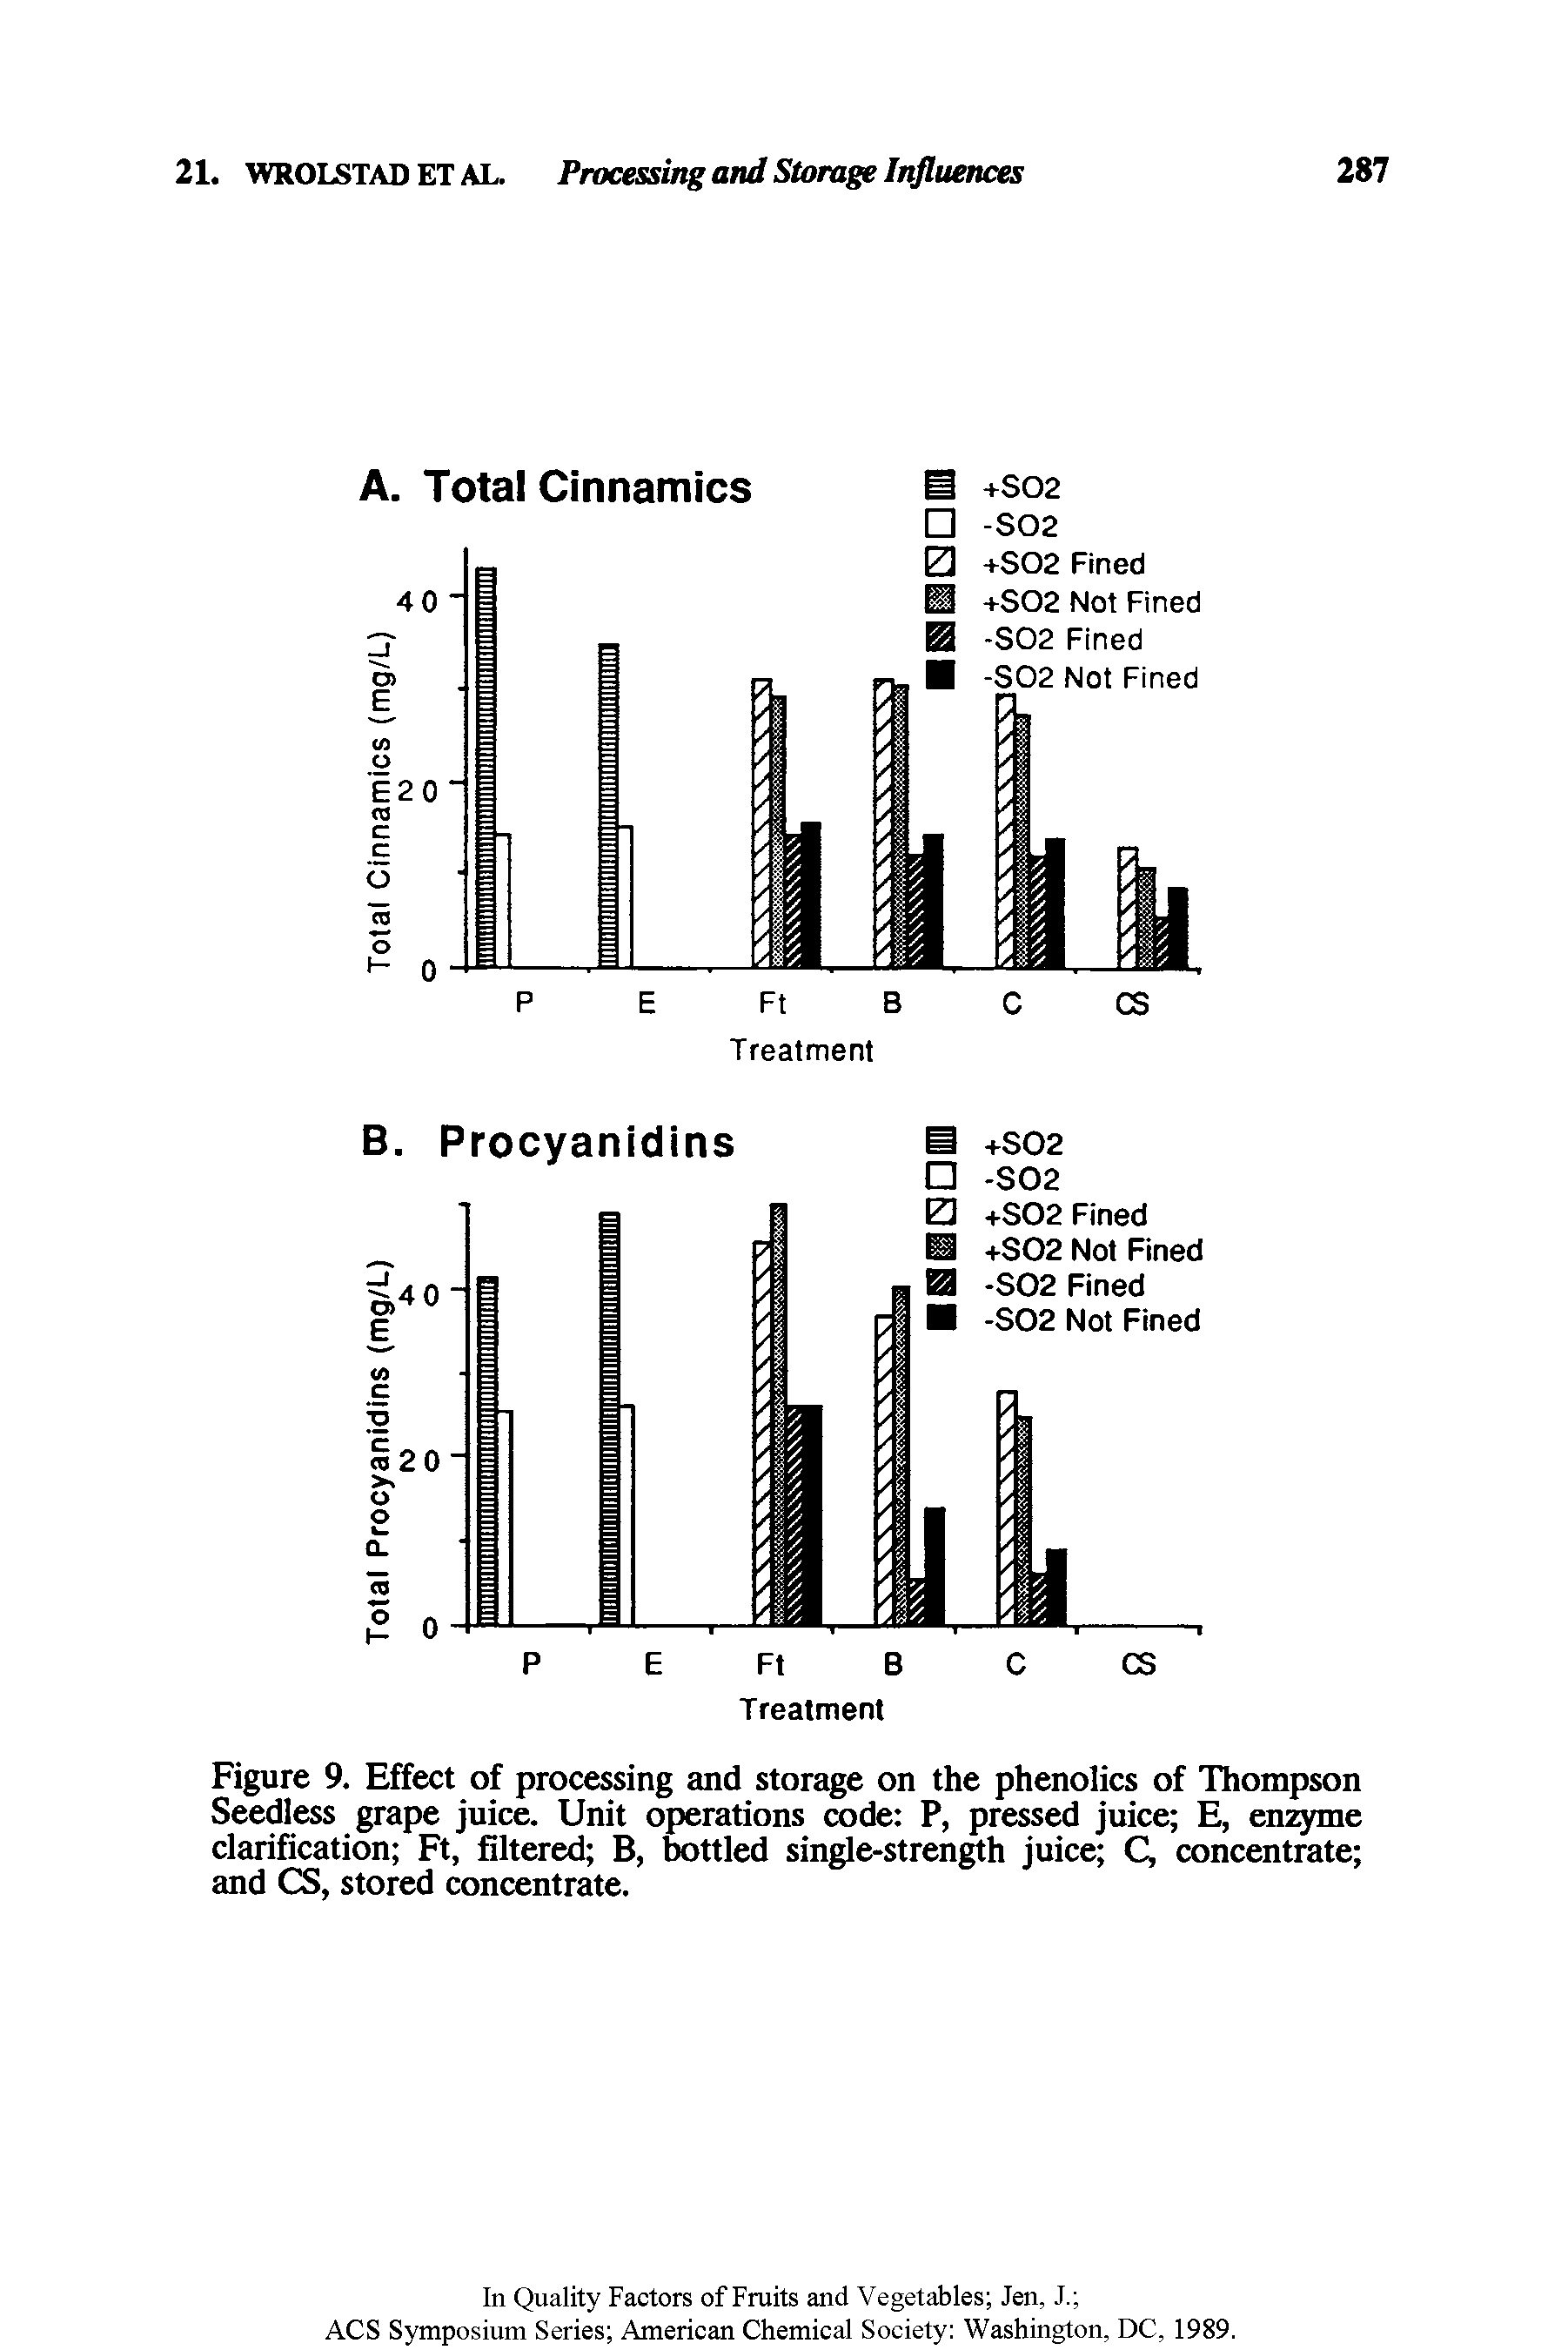 Figure 9. Effect of processing and storage on the phenolics of Thompson Seedless grape juice. Unit operations code P, pressed juice E, enzyme clarification Ft, filtered B, bottled single-strength juice C, concentrate and CS, stored concentrate.